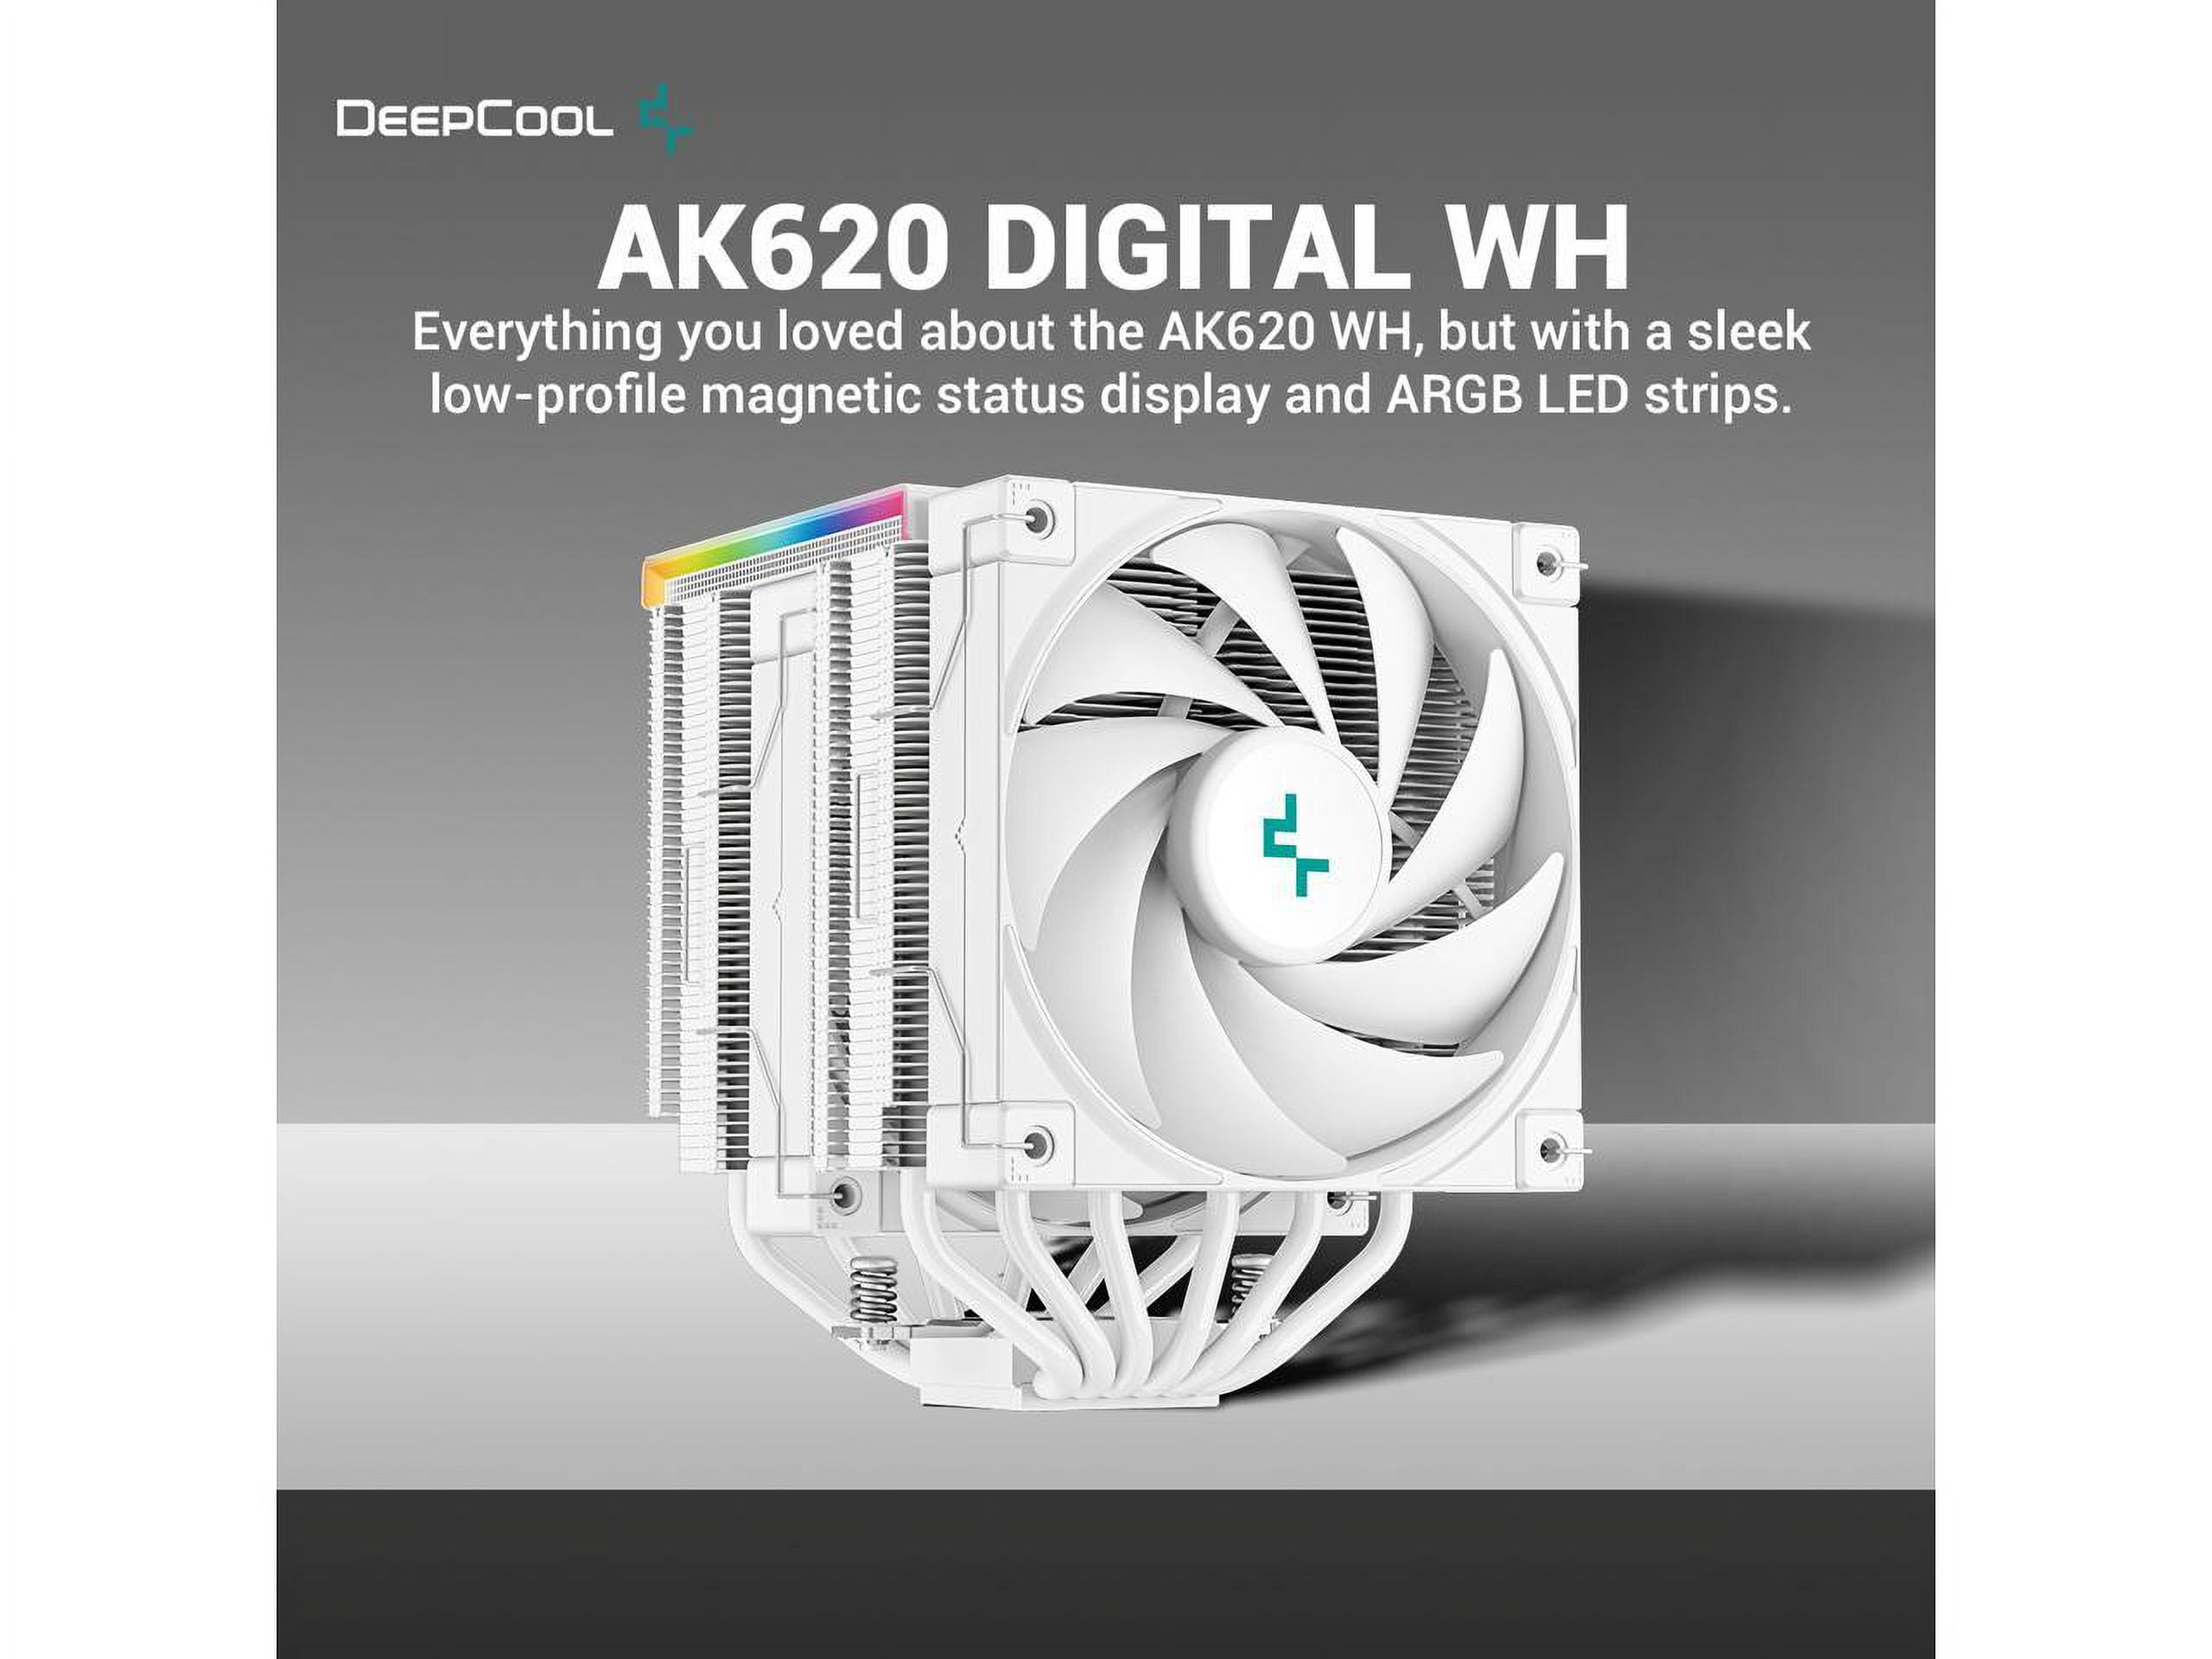 DeepCool AK620 DIGITAL WH Performance Air Cooler, Dual-Tower Layout,  Real-Time CPU Status Screen, 6 Copper Heat Pipes, 260W Heat Dissipation,  Twin 120mm FDB Fans, All White Design 